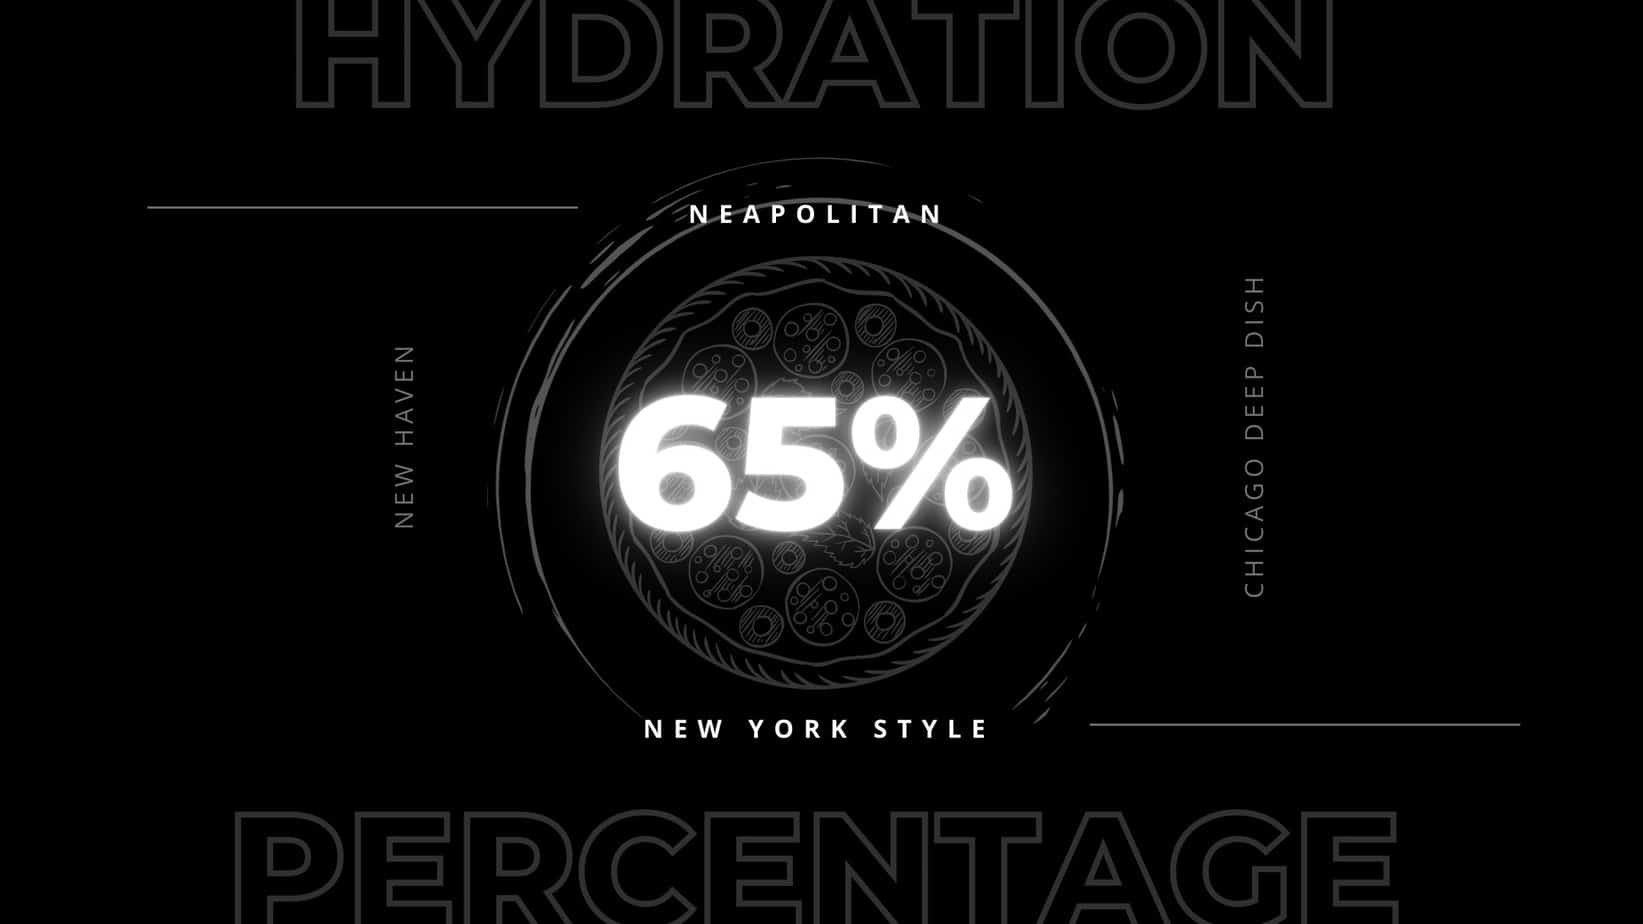 Hydration Percentage by Pizza Style